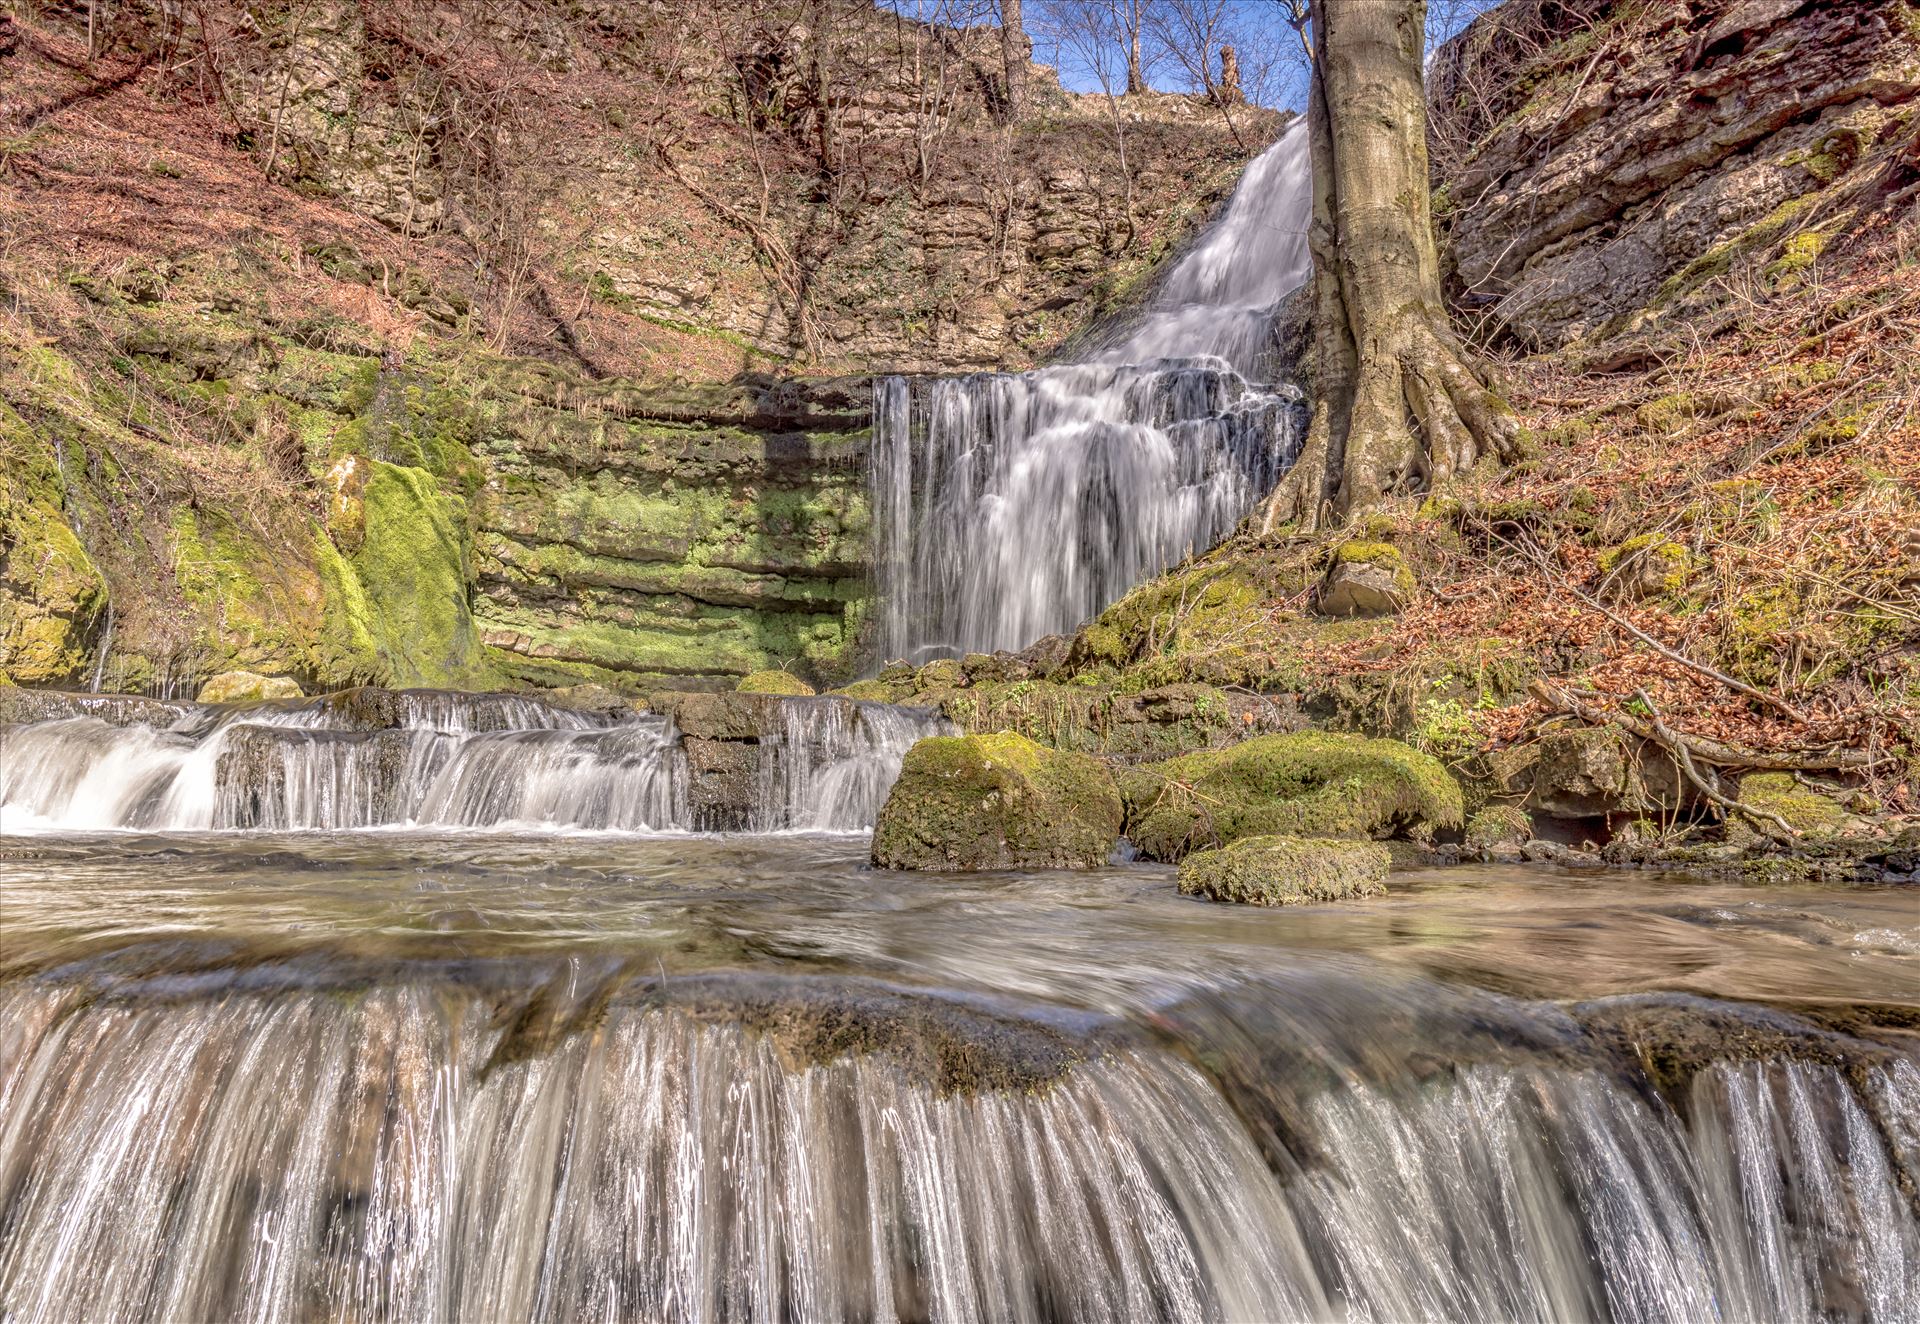 Scaleber Force Scaleber Force,a stunning 40ft waterfall, is in a lovely location a mile or so above Settle in Ribblesdale on the road to Kirkby Malham in the Yorkshire Dales. by philreay